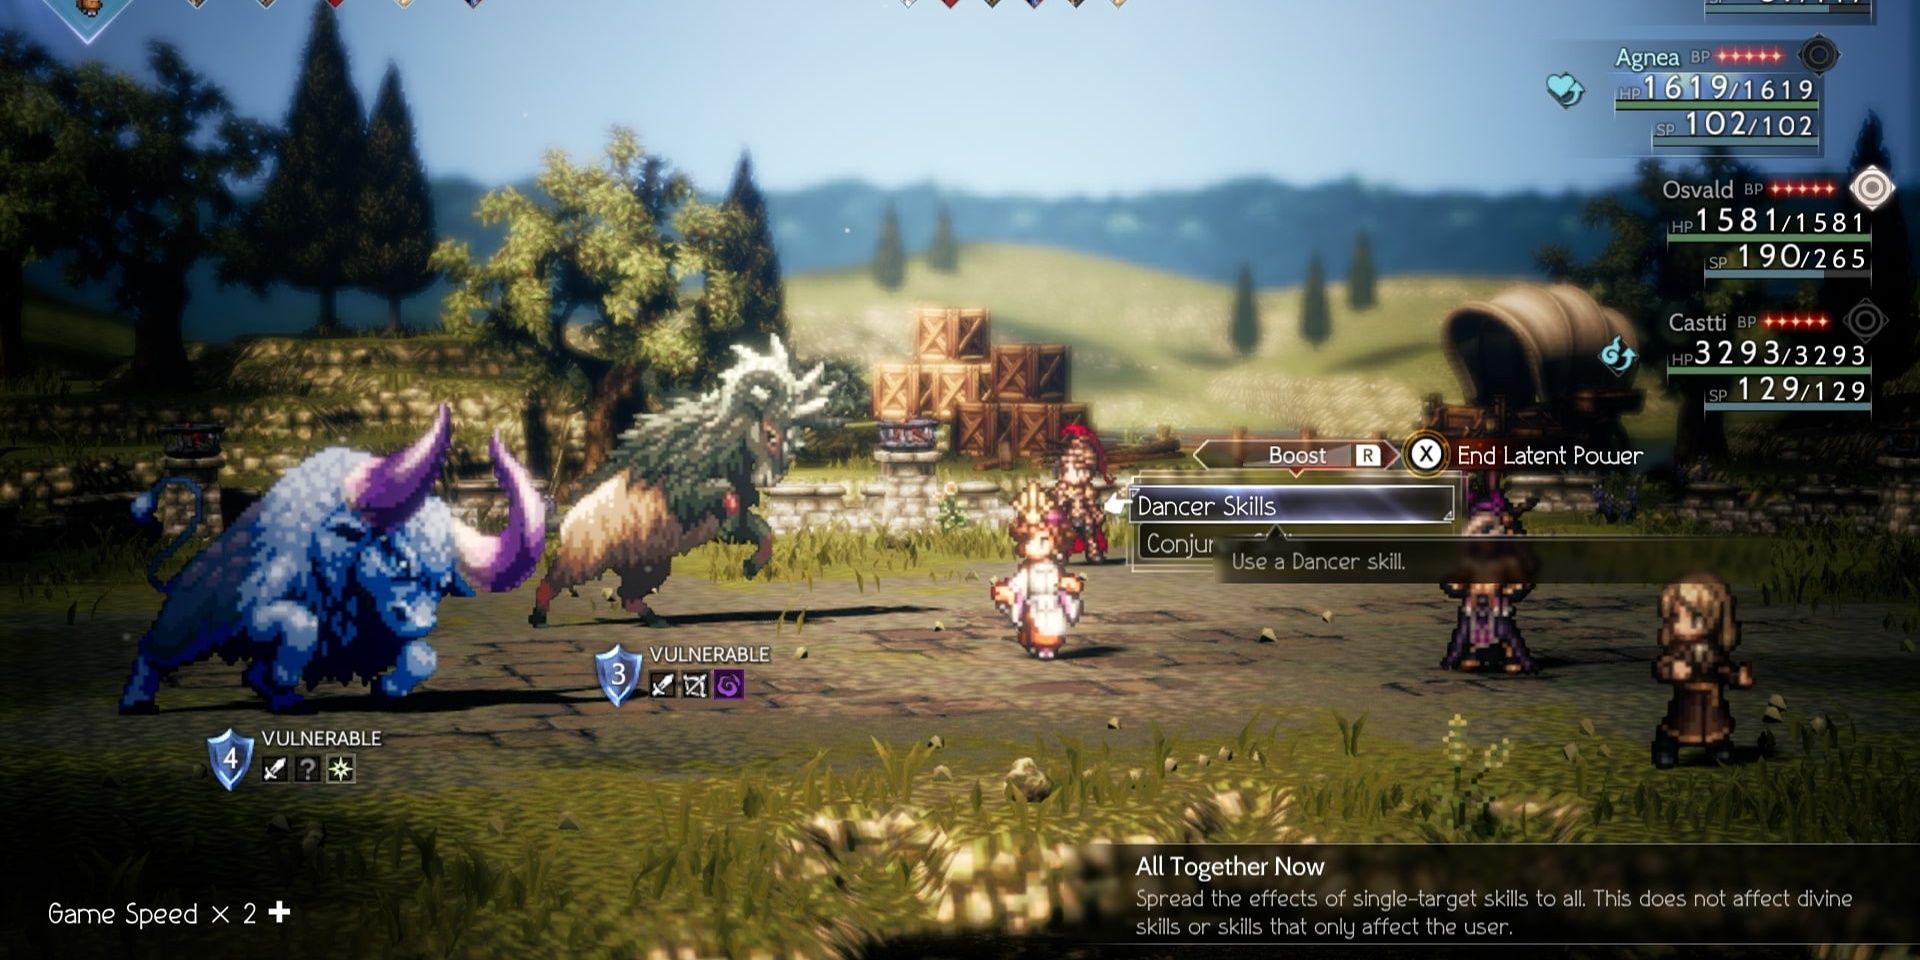 Agnea's Latent Power from Octopath Traveler 2